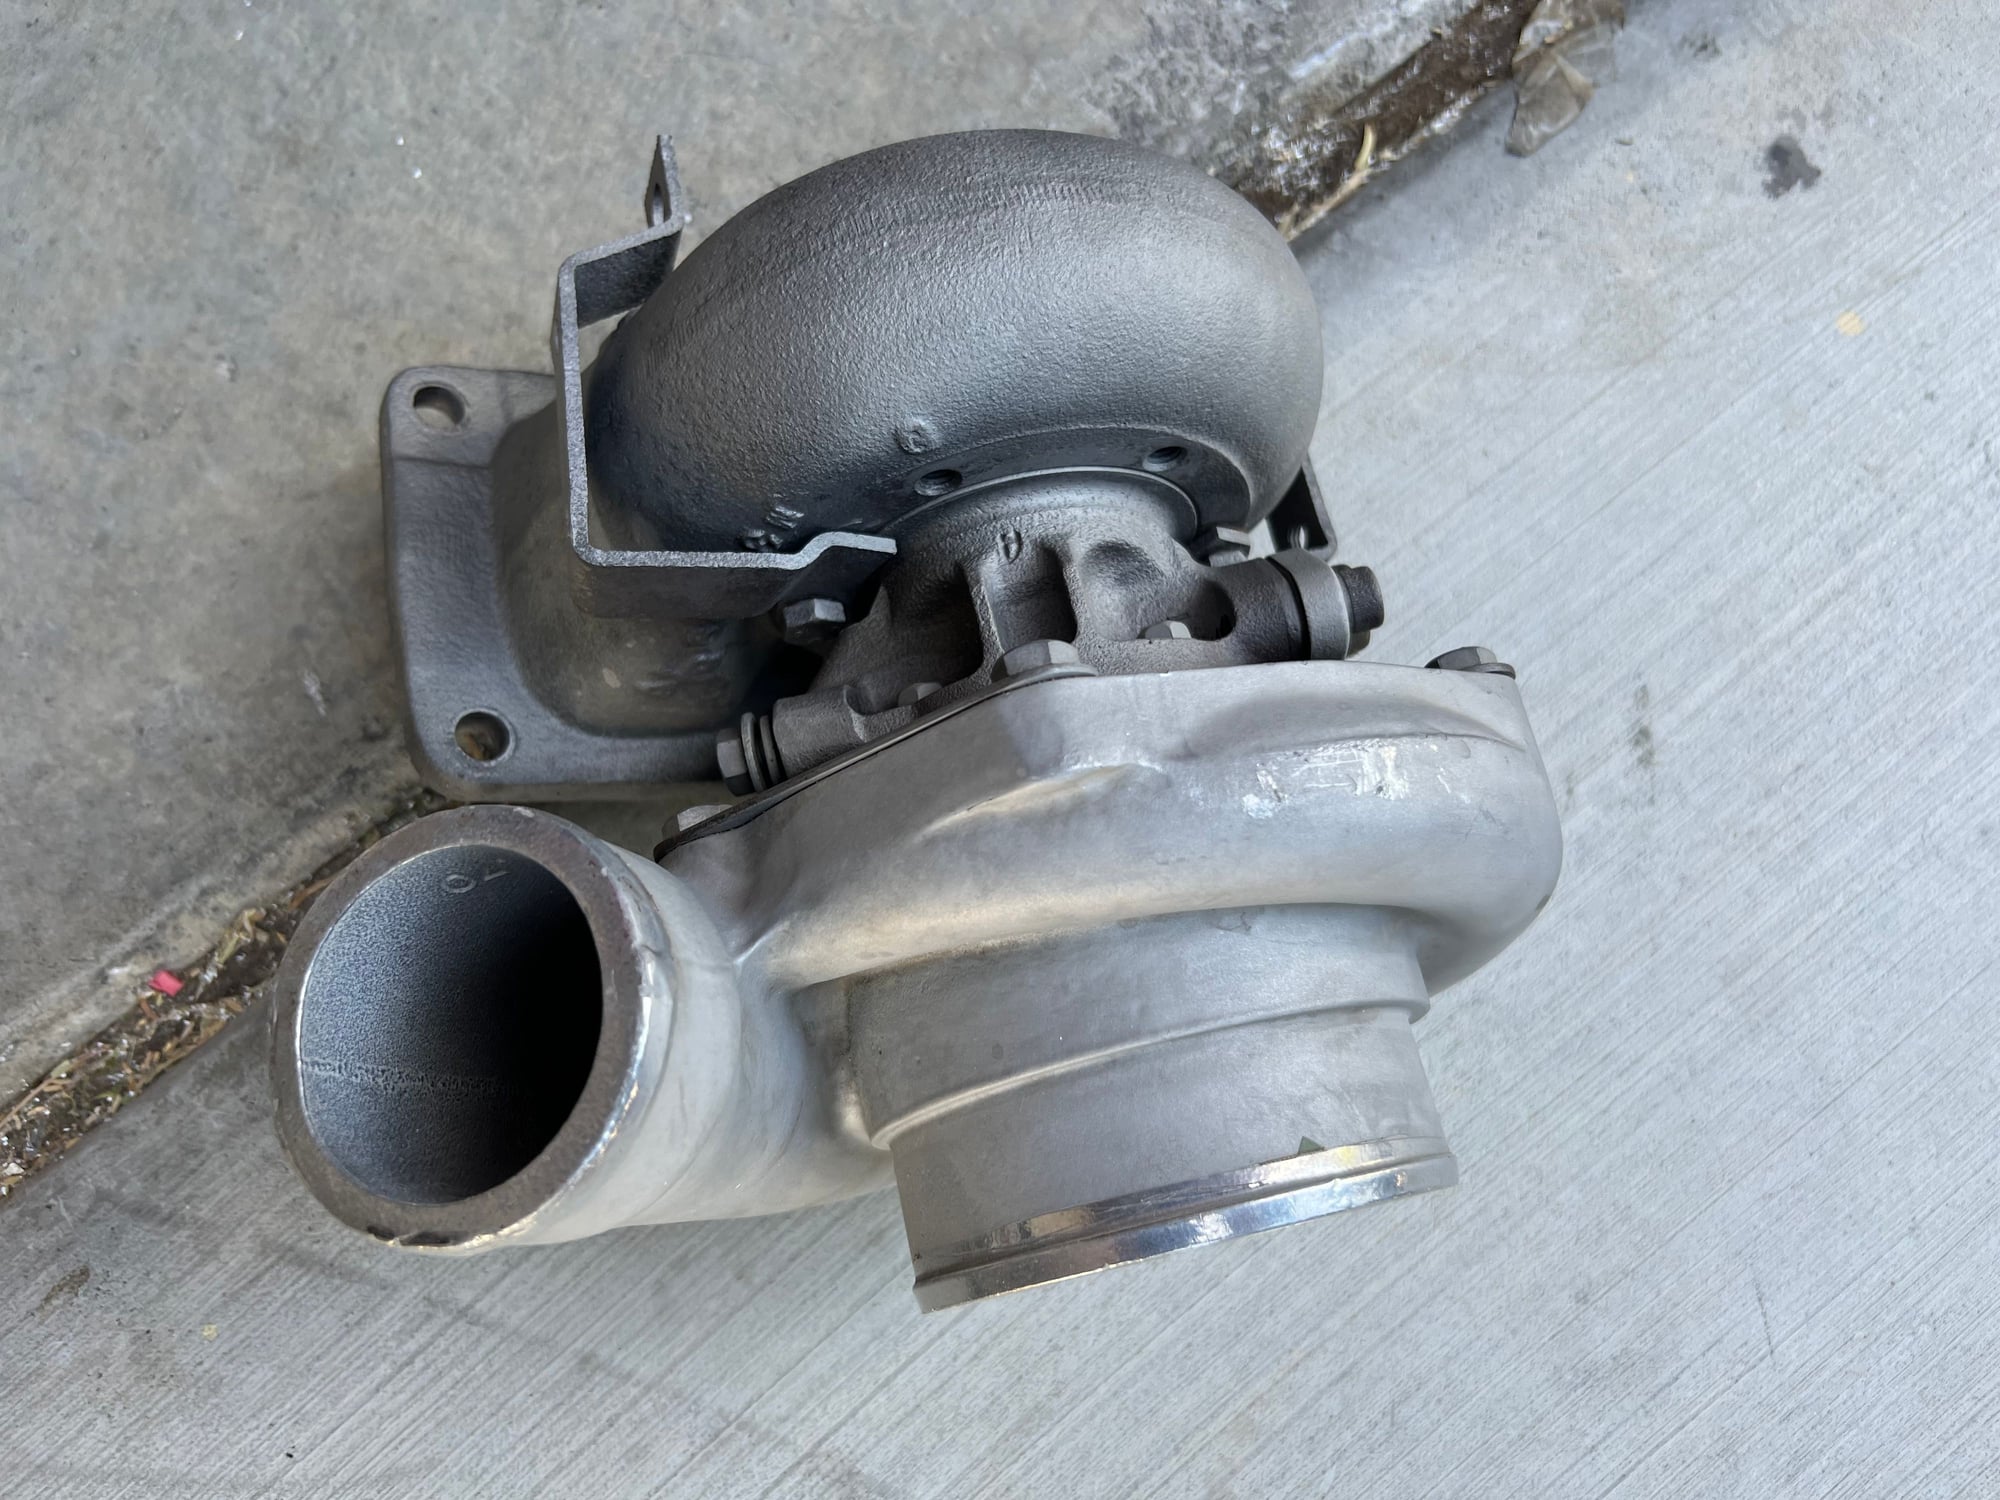 Engine - Power Adders - HKS t04r turbo kit for FD - Used - 1992 to 1995 Mazda RX-7 - Las Vegas, NV 89014, United States